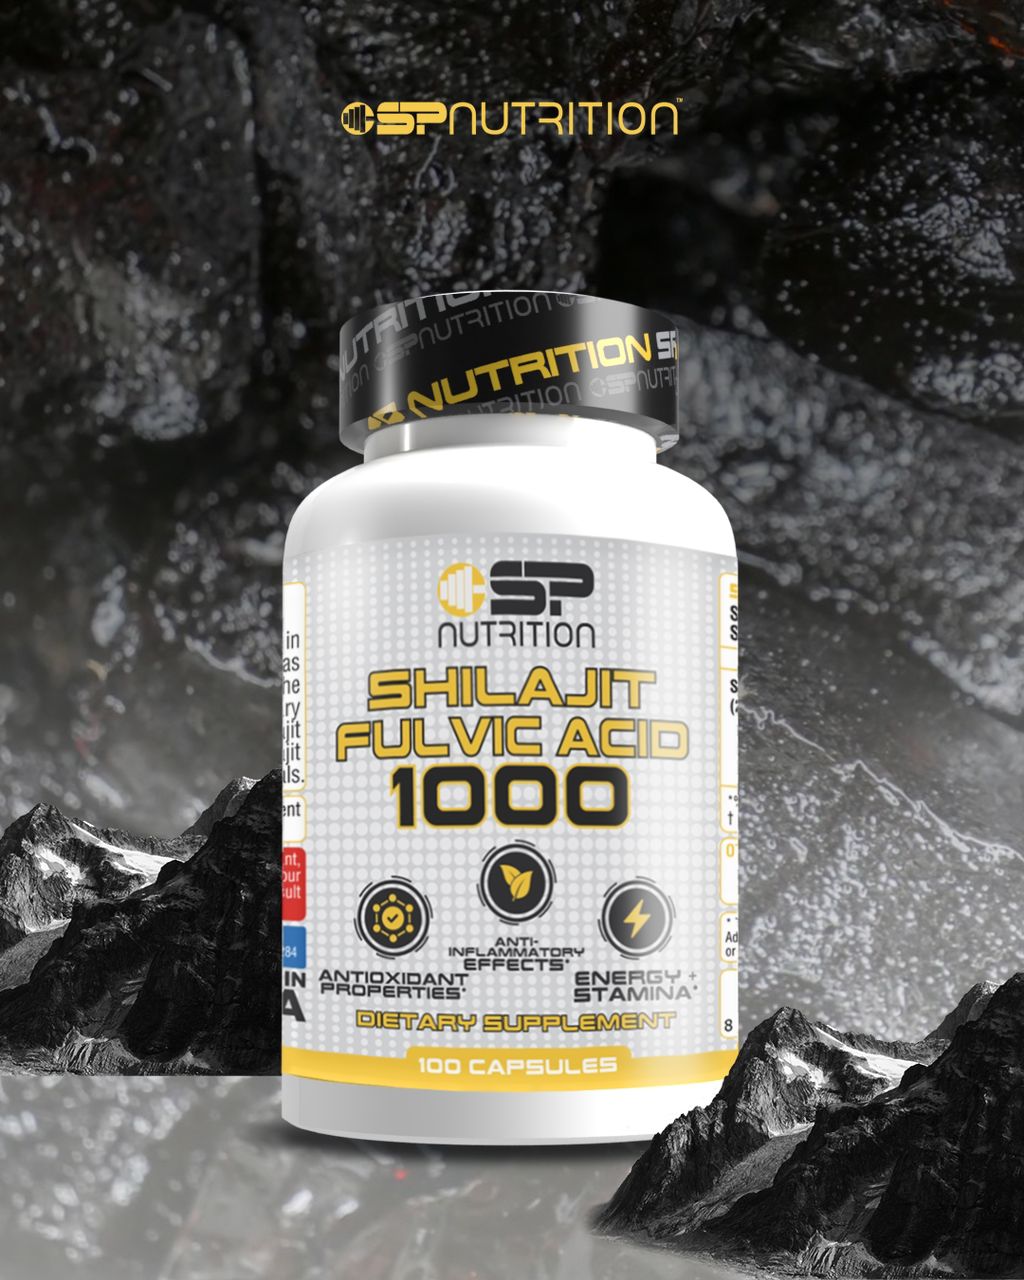 SHILAJIT FULVIC ACID 1000, Absorption Enhancer, Trace Minerals for Energy, Performance, Immune Support, 100 capsules